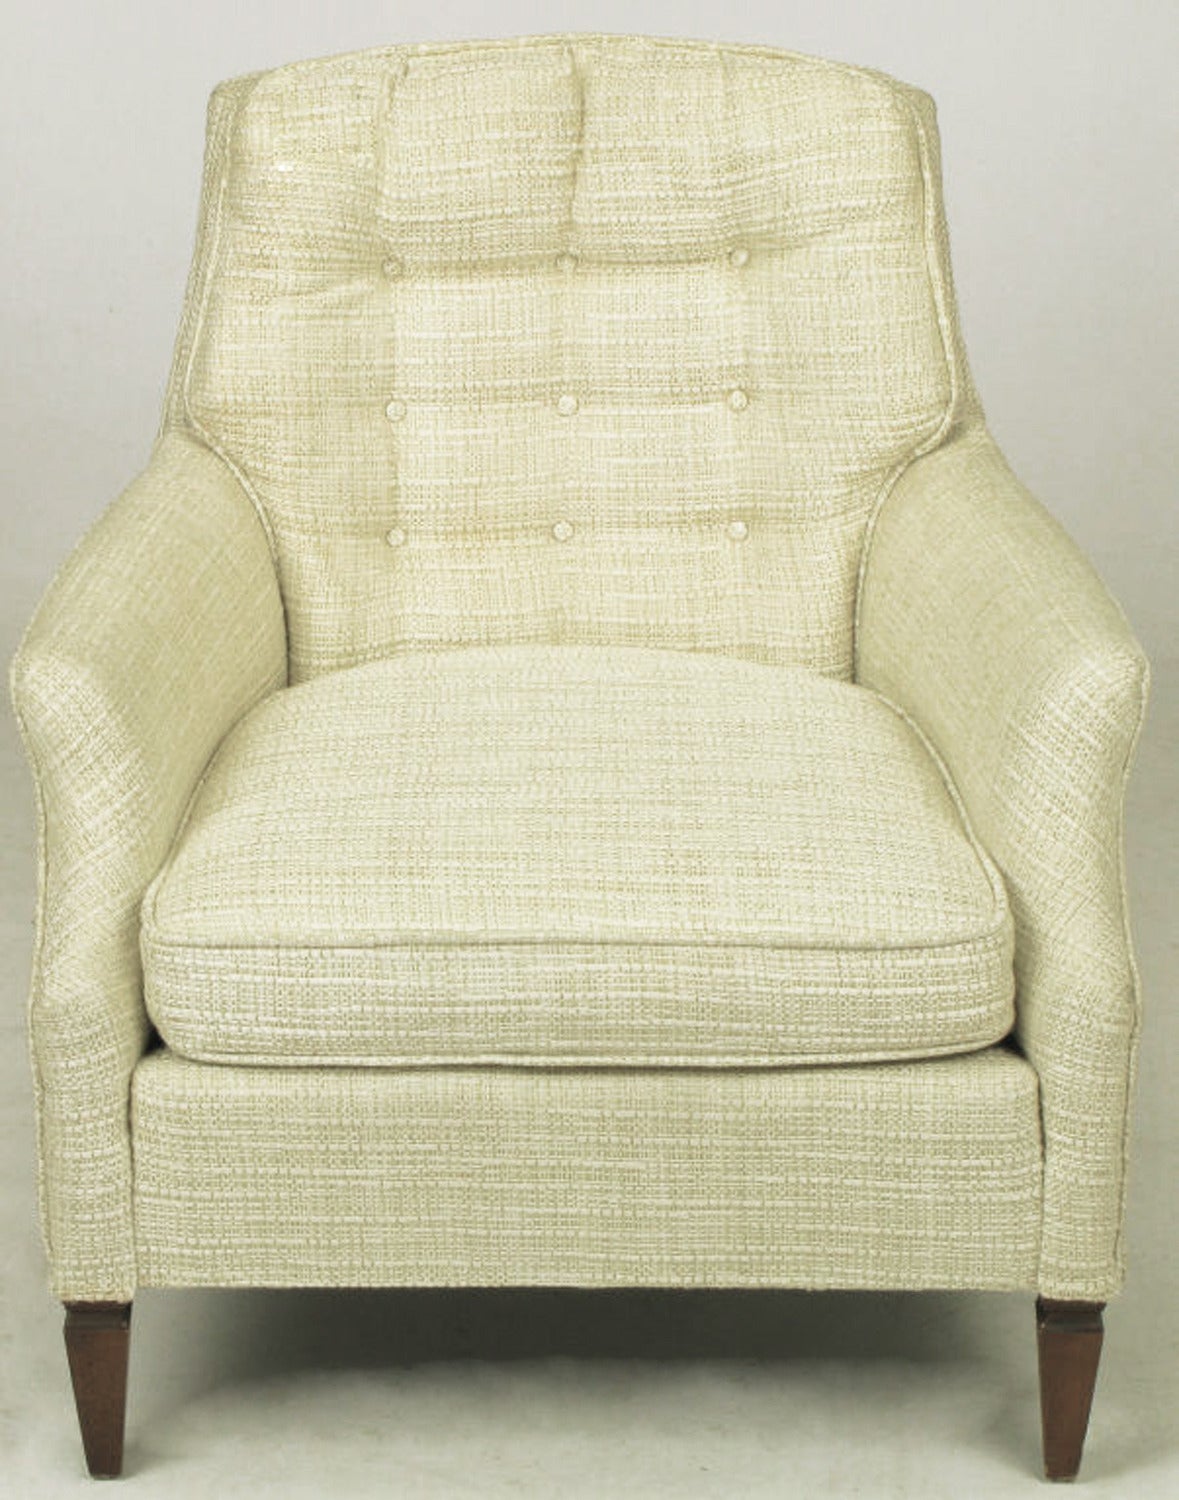 Cream-oatmeal linen upholstered lounge chair with matching ottoman. Button tufted back, loose seat cushion with sculpted arms that splay slightly. Reverse obelisk walnut legs.